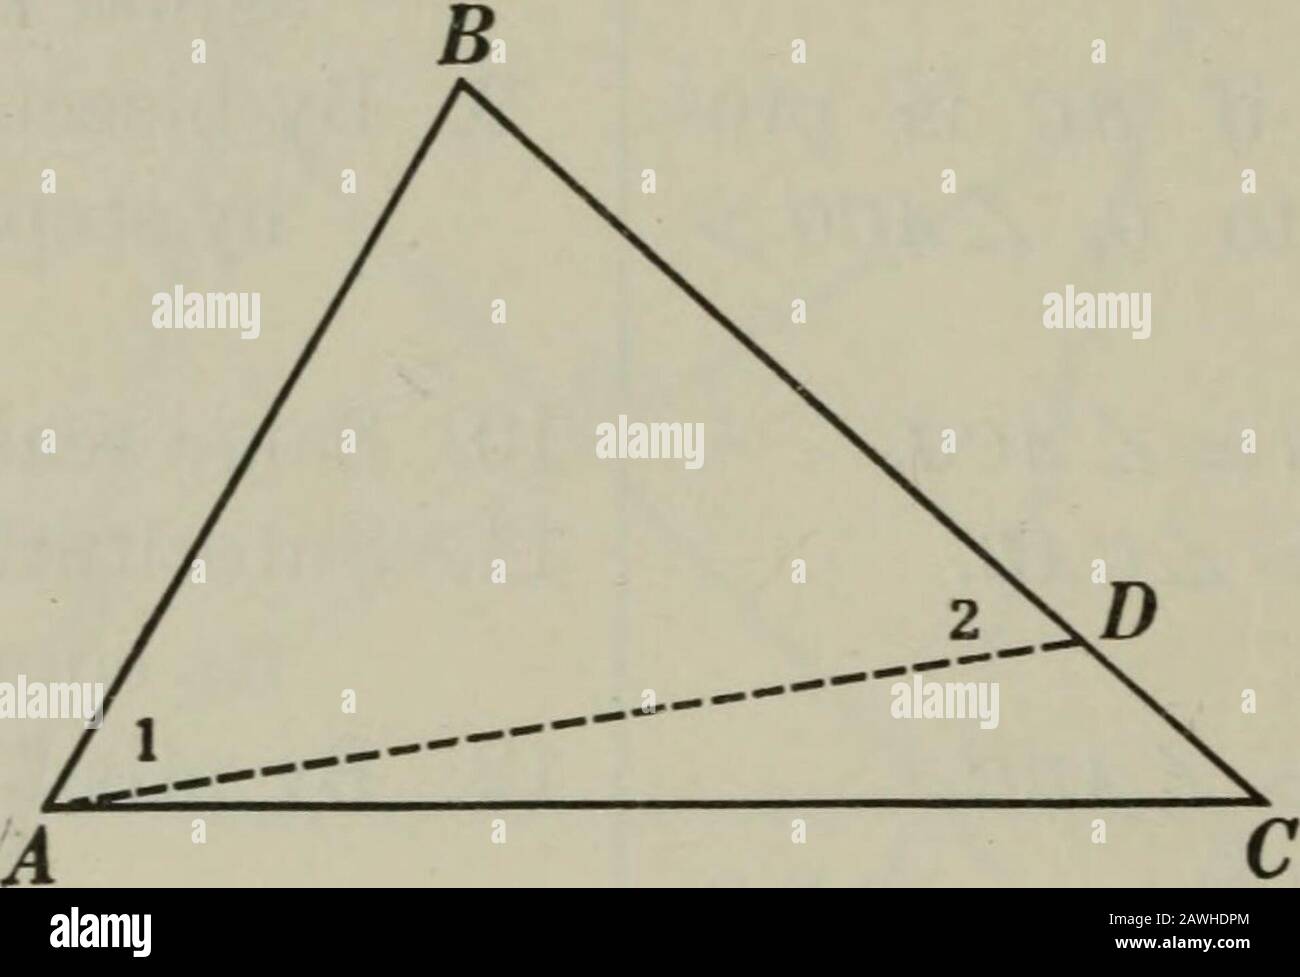 Plane and solid geometry . 54 PLANE GEOMETRY Proposition XV. Theorem 156. If two sides of a triangle are unequal, the angleopposite the greater side is greater than the angle oppositethe less side.. Given A ABC with BC &gt;To prove Z CAB &gt; Z (7. Argument 1. On BC lay off BD = AB, 2. Draw AD. 3. ThenZl = Z2. 4. NowZ2 &gt; Za BA, 5. .-. Zl &gt; Z C, 6. But Z CAB &gt; Zl, 7. .-. /.CAB &gt; Z a. Q.E.D. Reasons 1. Circle post. §§ 122, 157. 2. Str. line post. I. § 54, 15. 3. The base A of an isosceles A are equal. § 111. 4. If one side of a A is pro- longed, the ext. Z formed &gt; either of the r Stock Photo